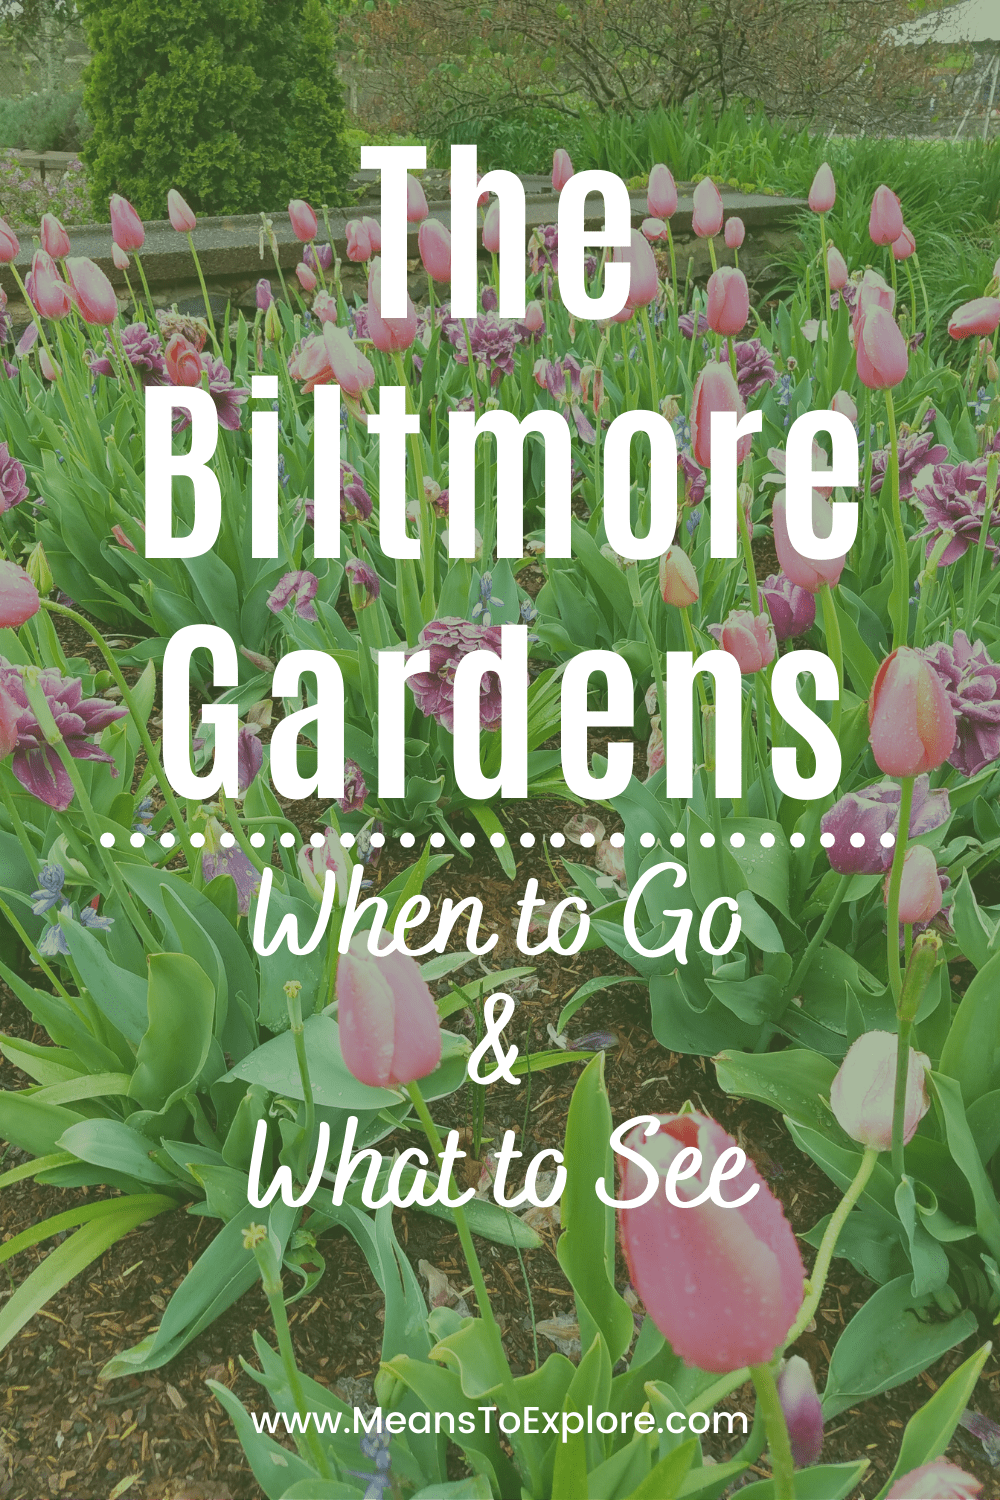 The Beautiful Biltmore Gardens: Complete Guide for When to Go & What to See